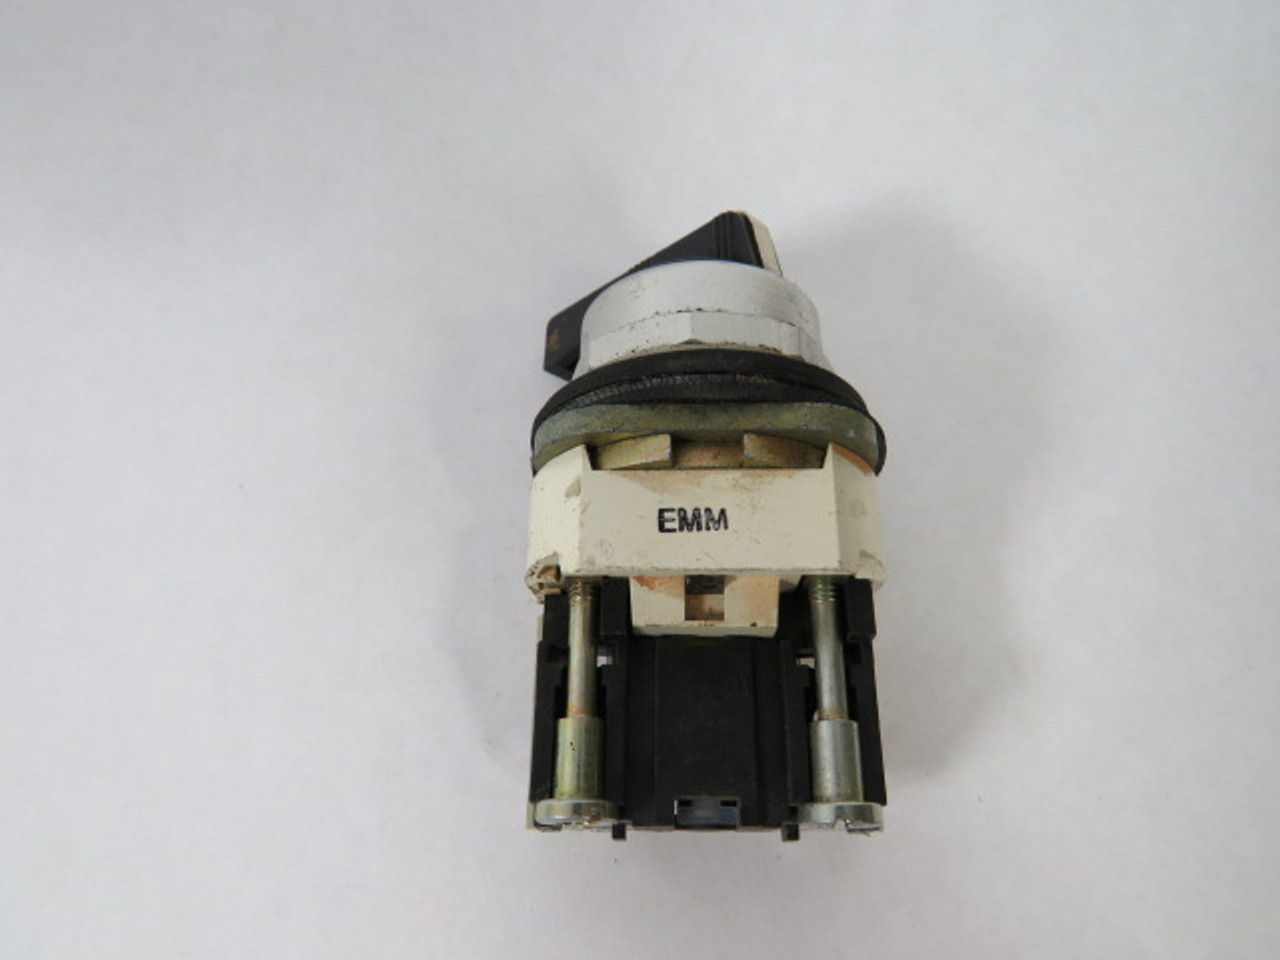 Allen-Bradley 800T-H17D1 Series T Selector Switch 1NO 2-Position USED